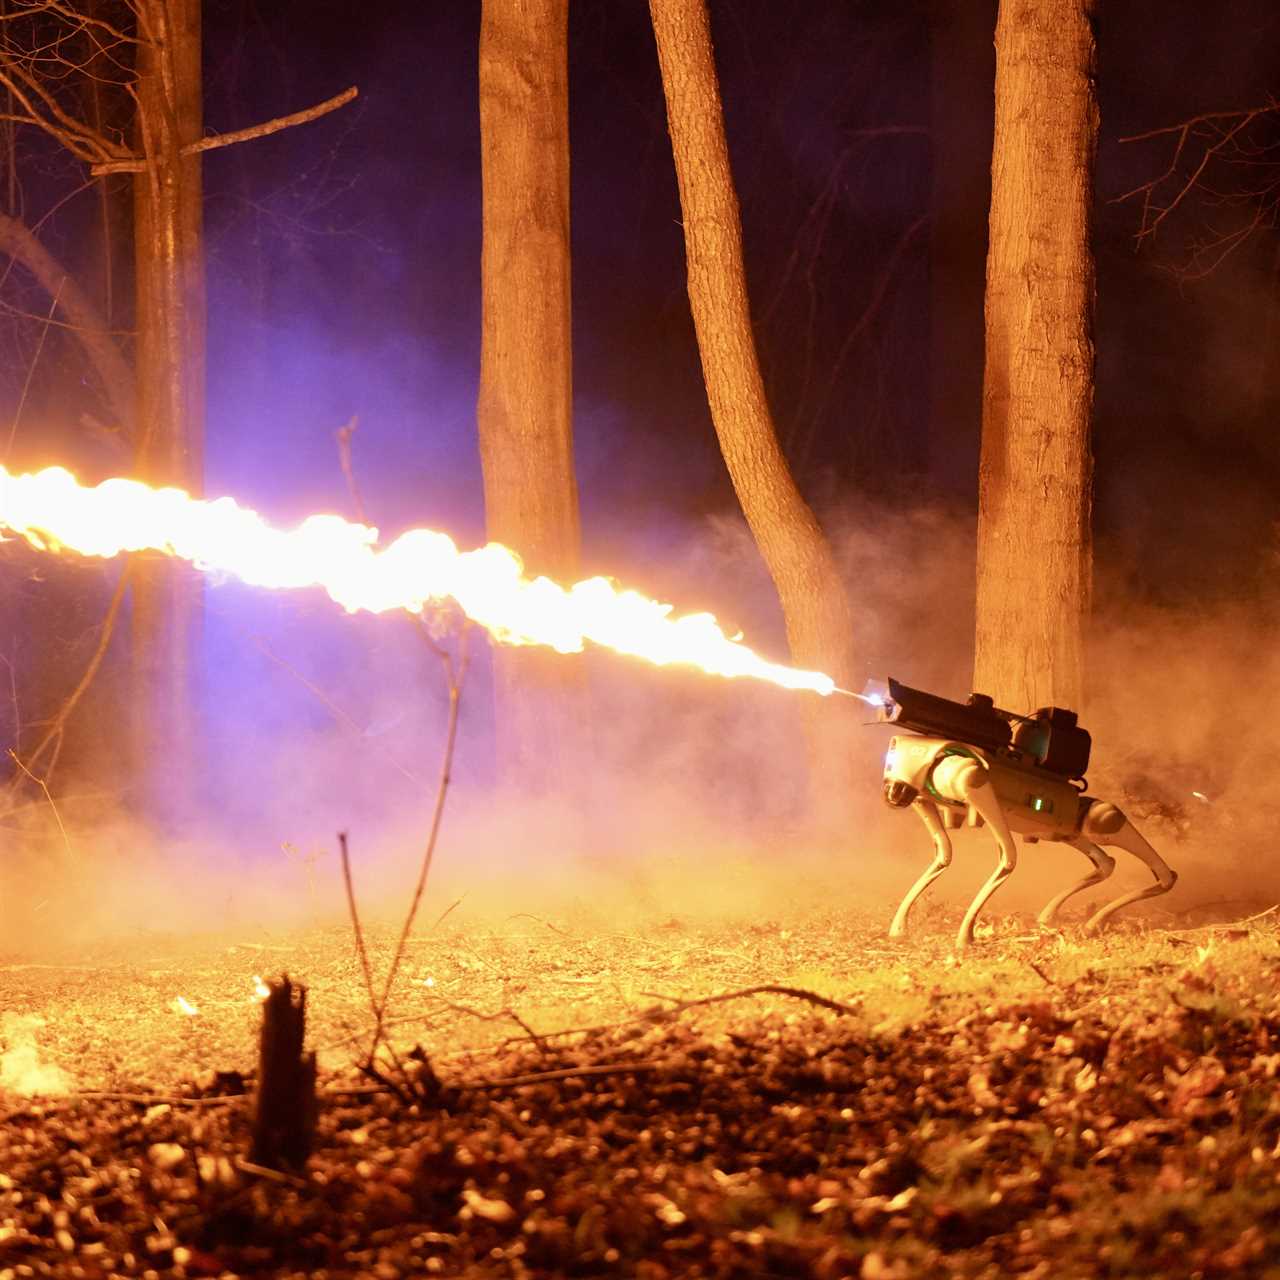 Themonator shooting fire out form its flamethrower